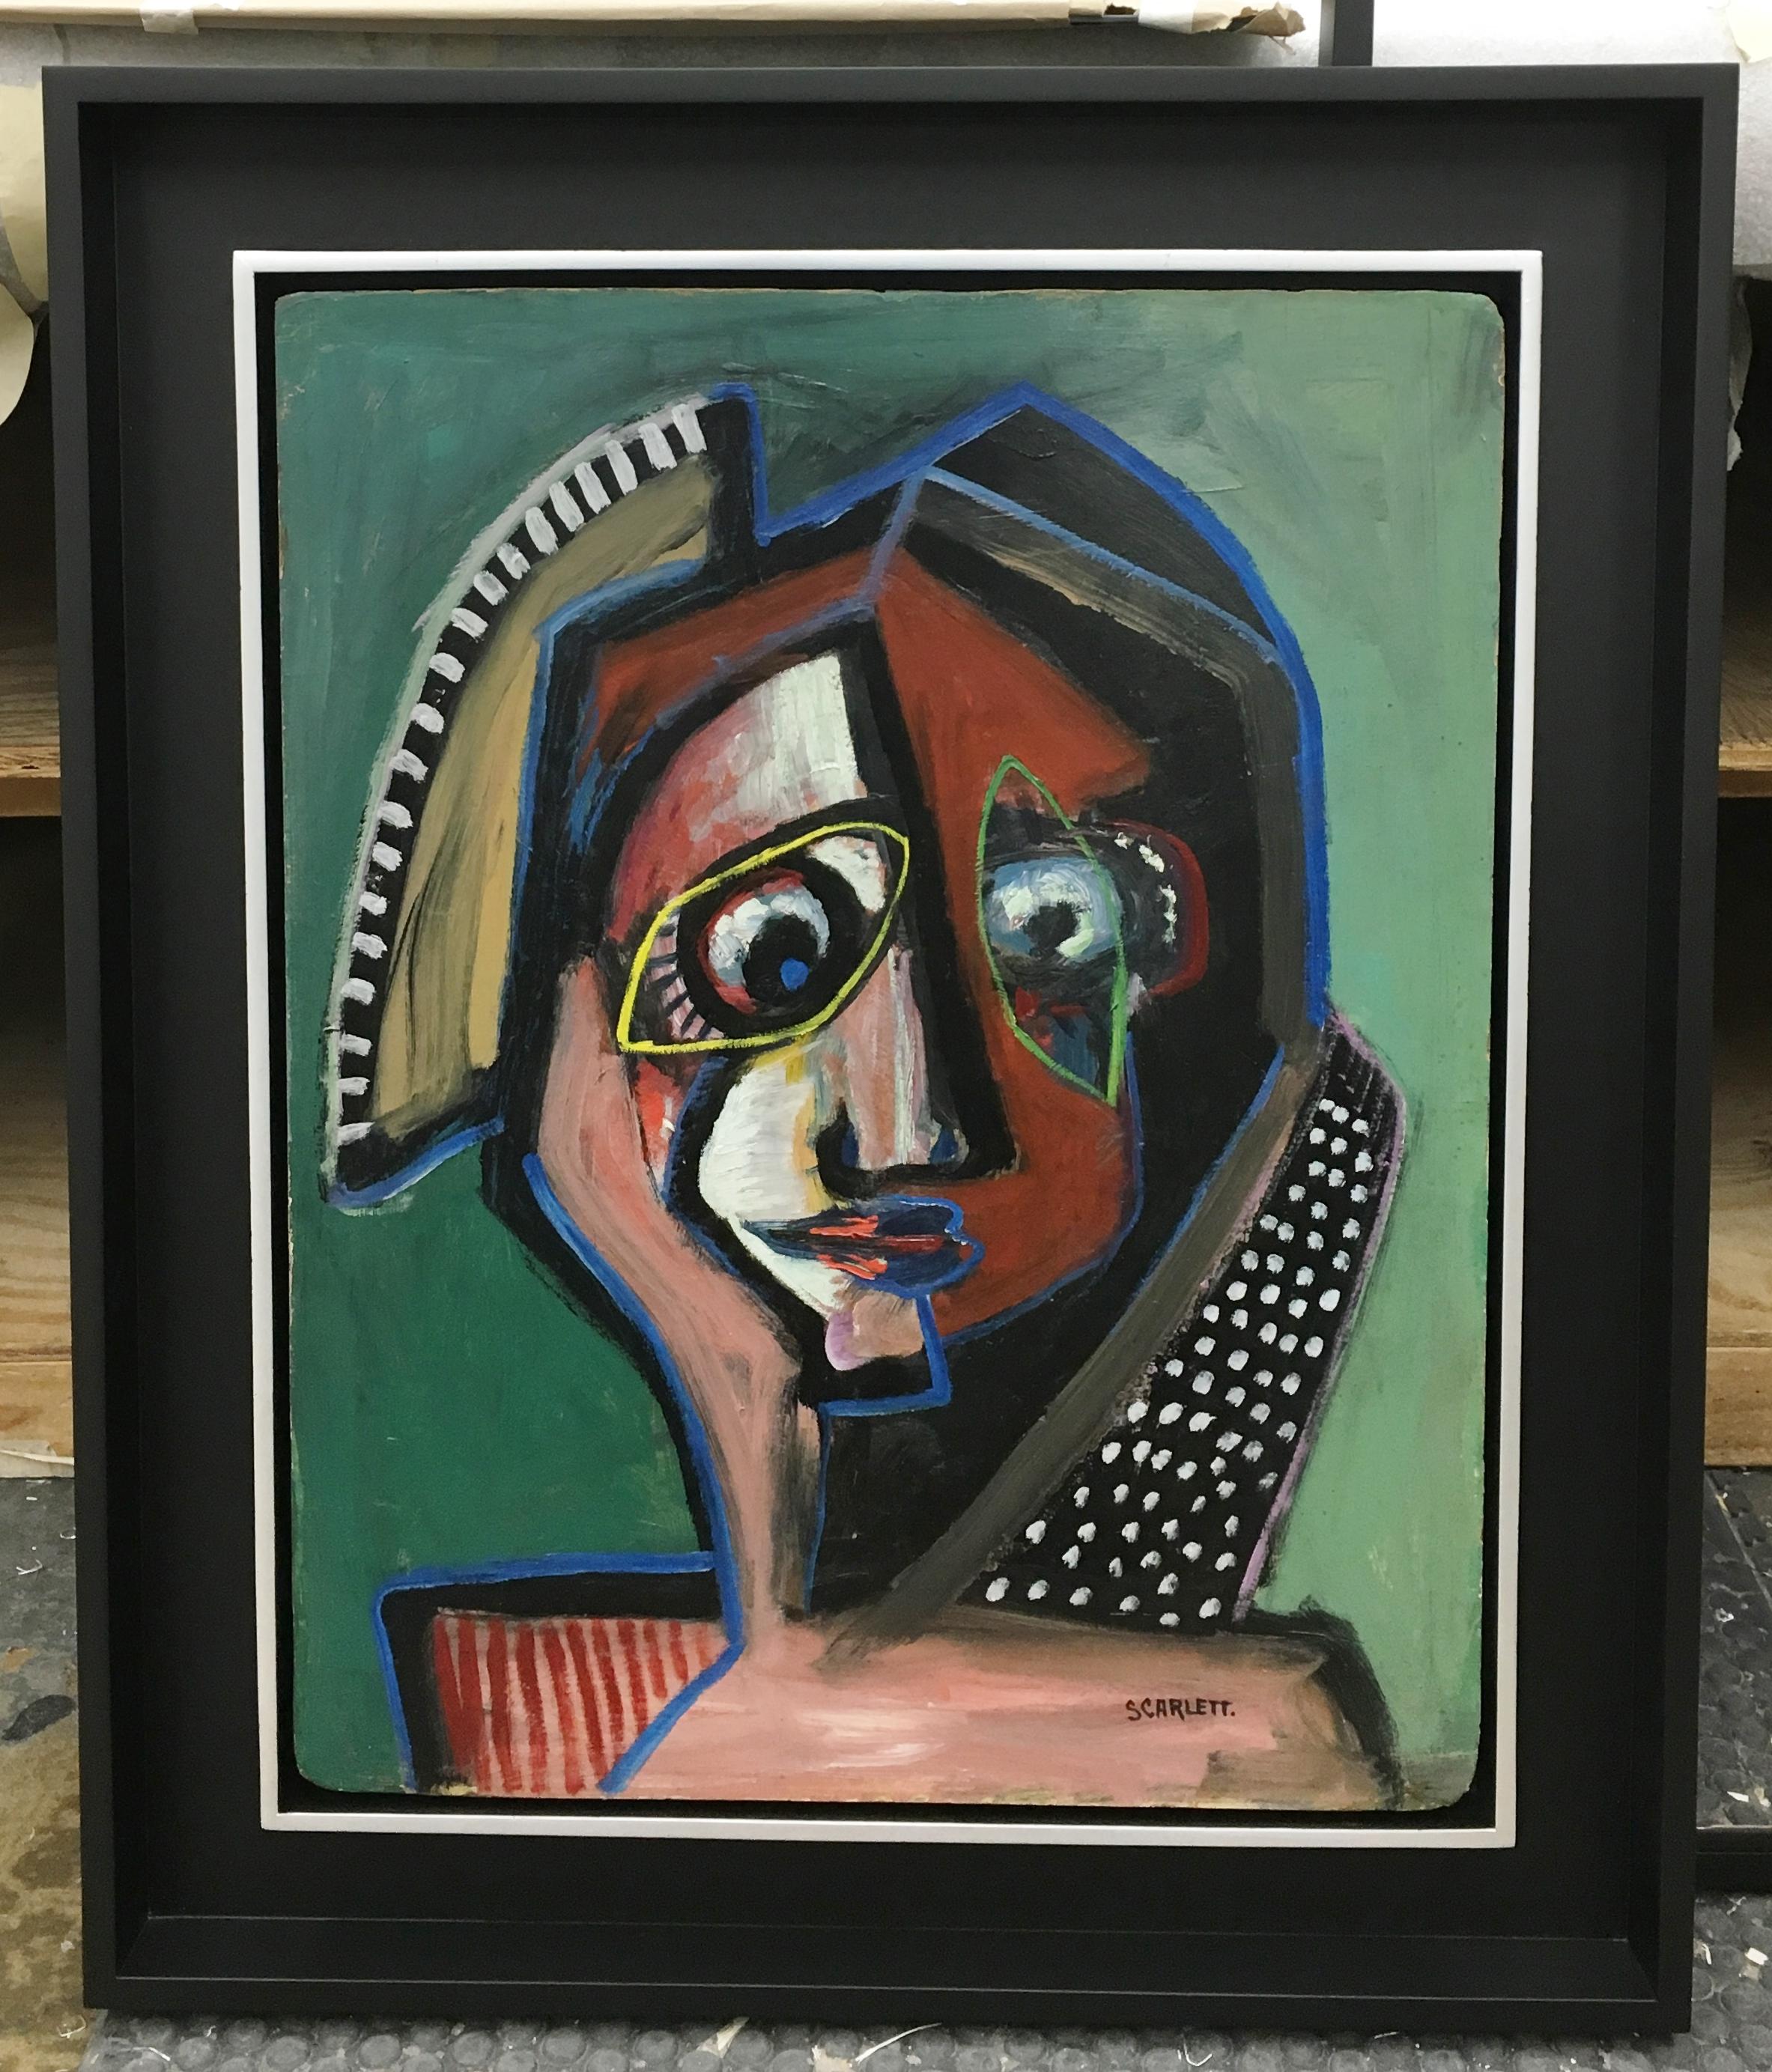 Untitled, Cubist Figure - Painting by Rolph Scarlett